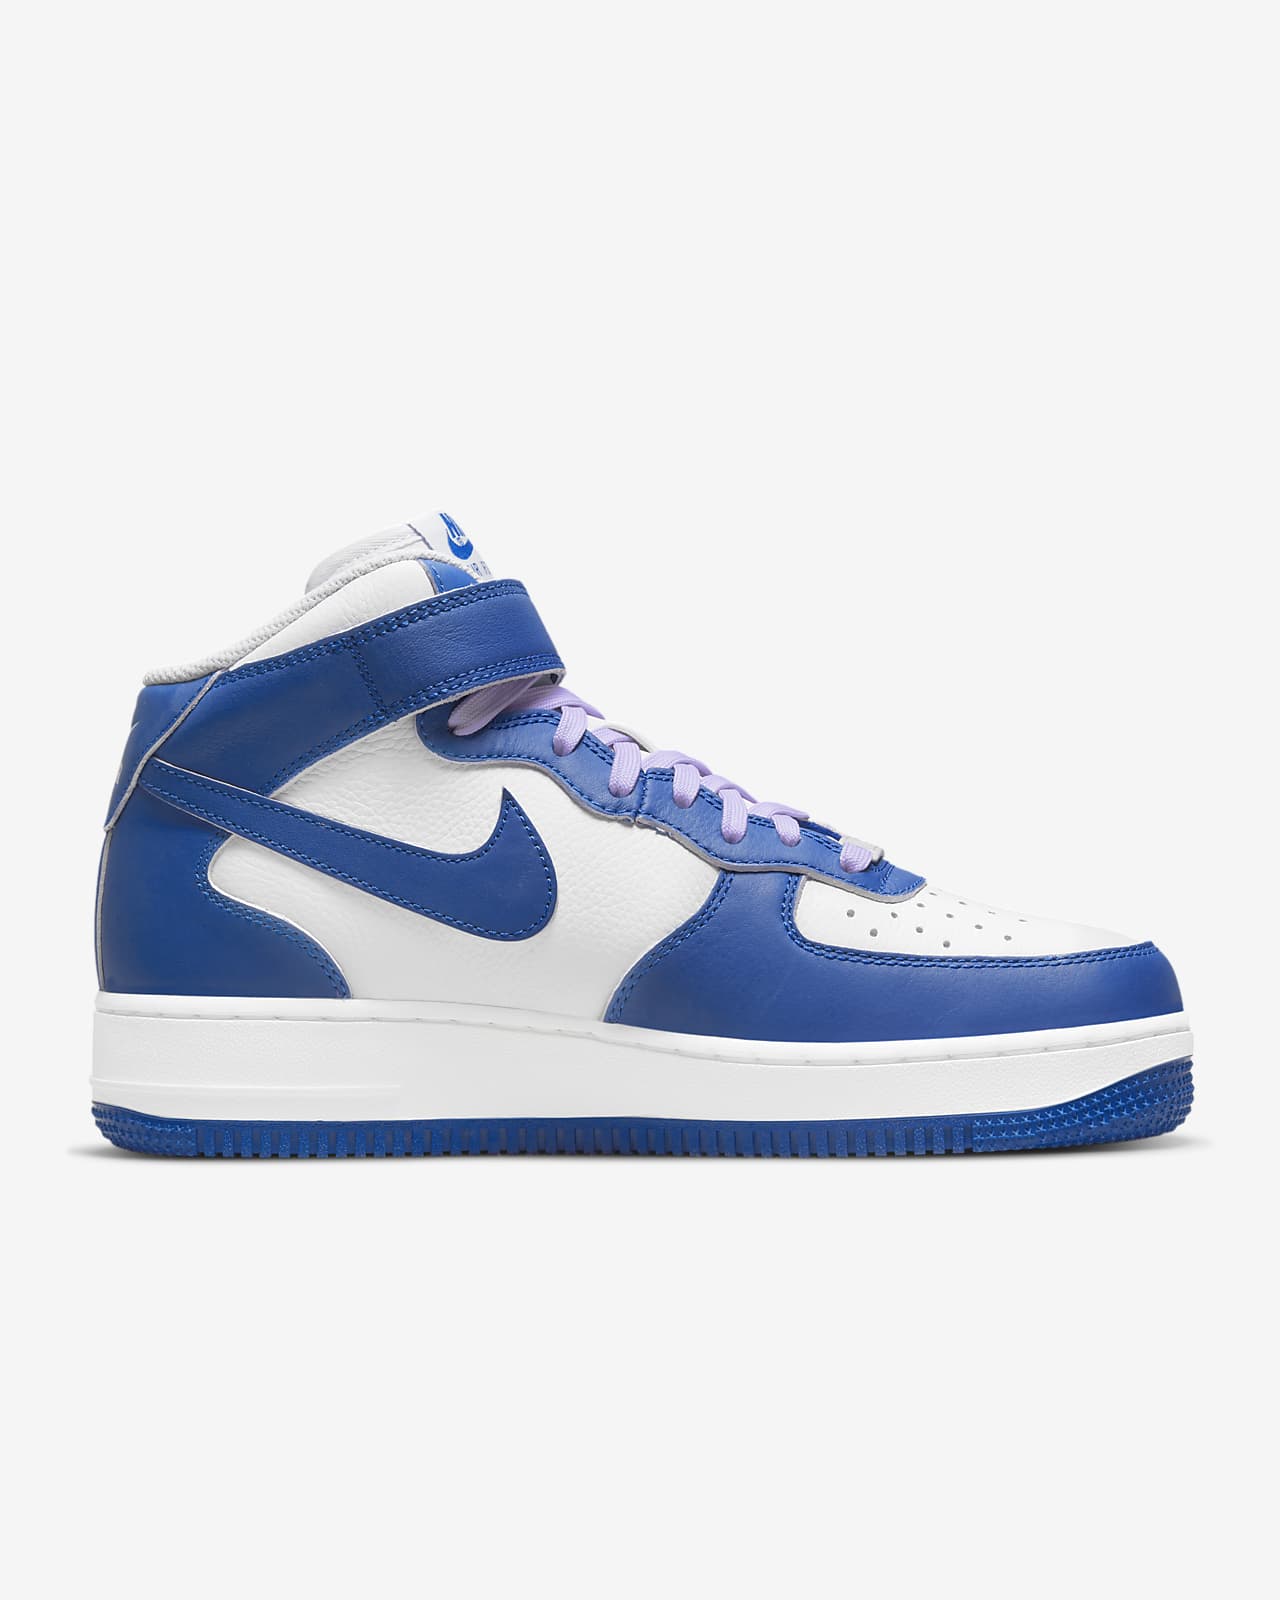 nike air force 1 mujer colores